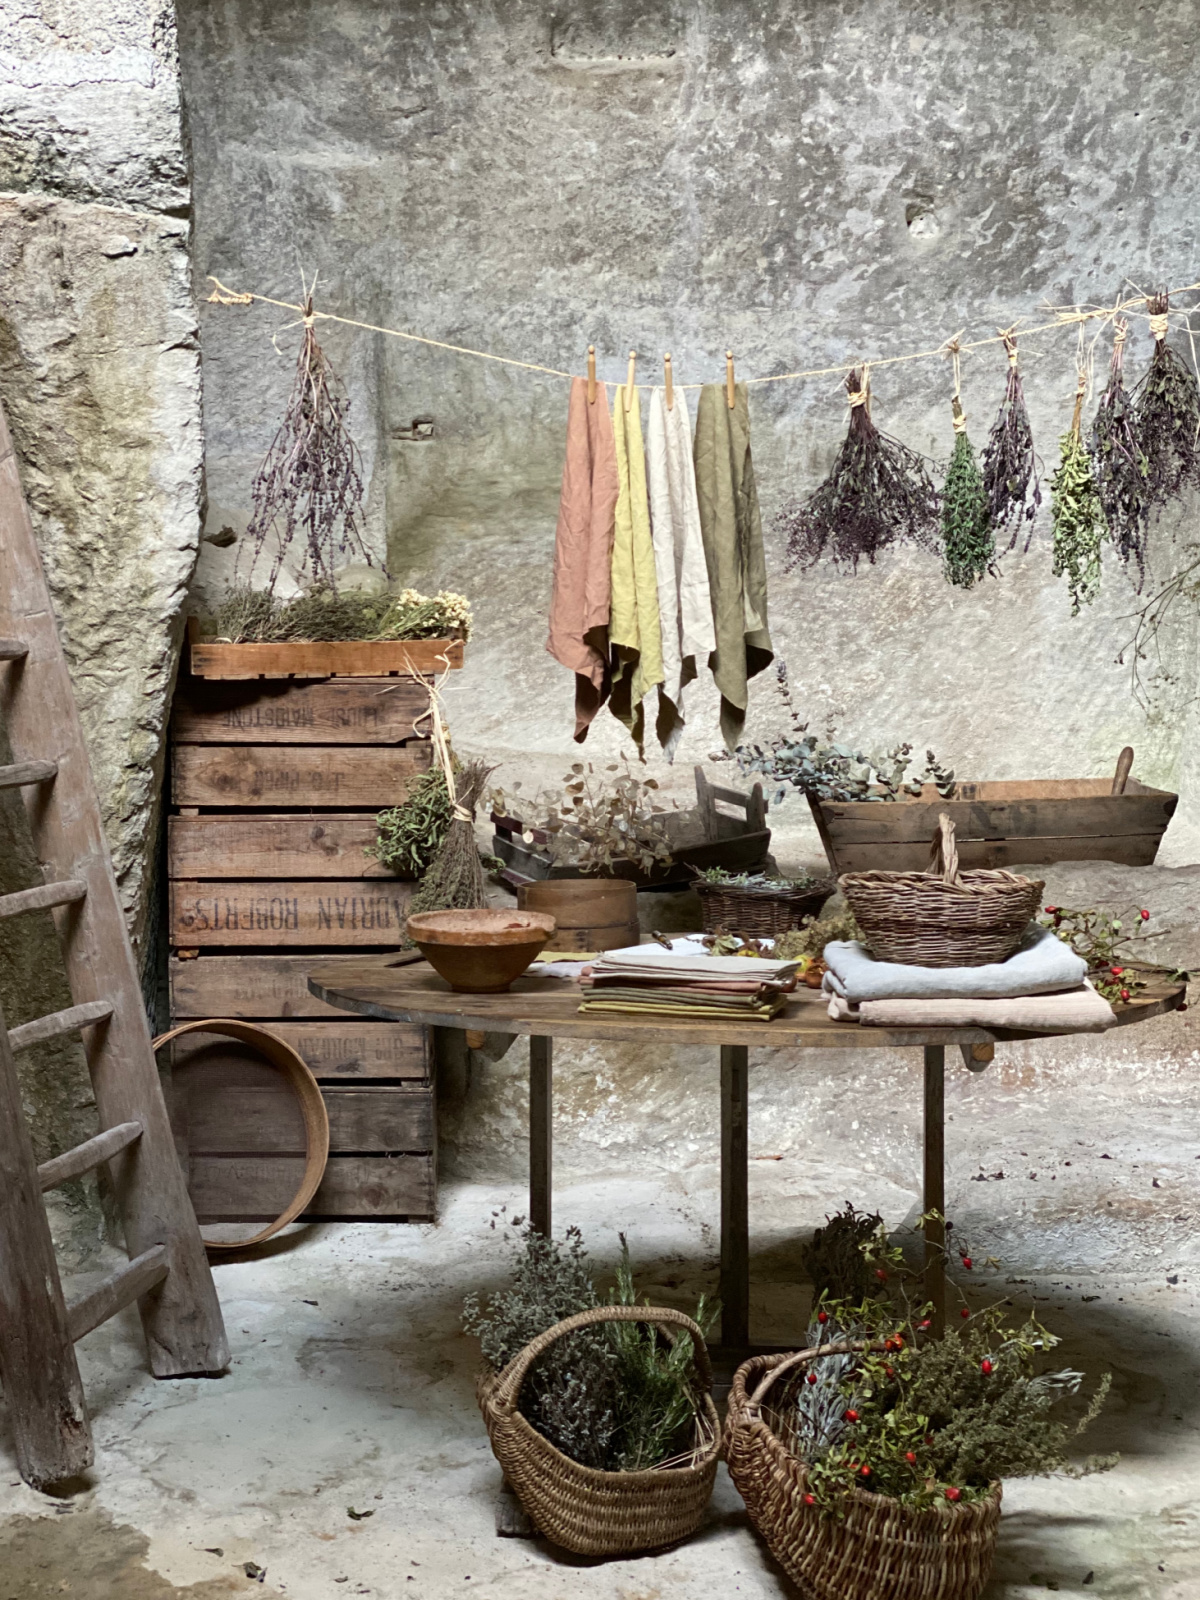 drying herbs and dyed cloths on a line